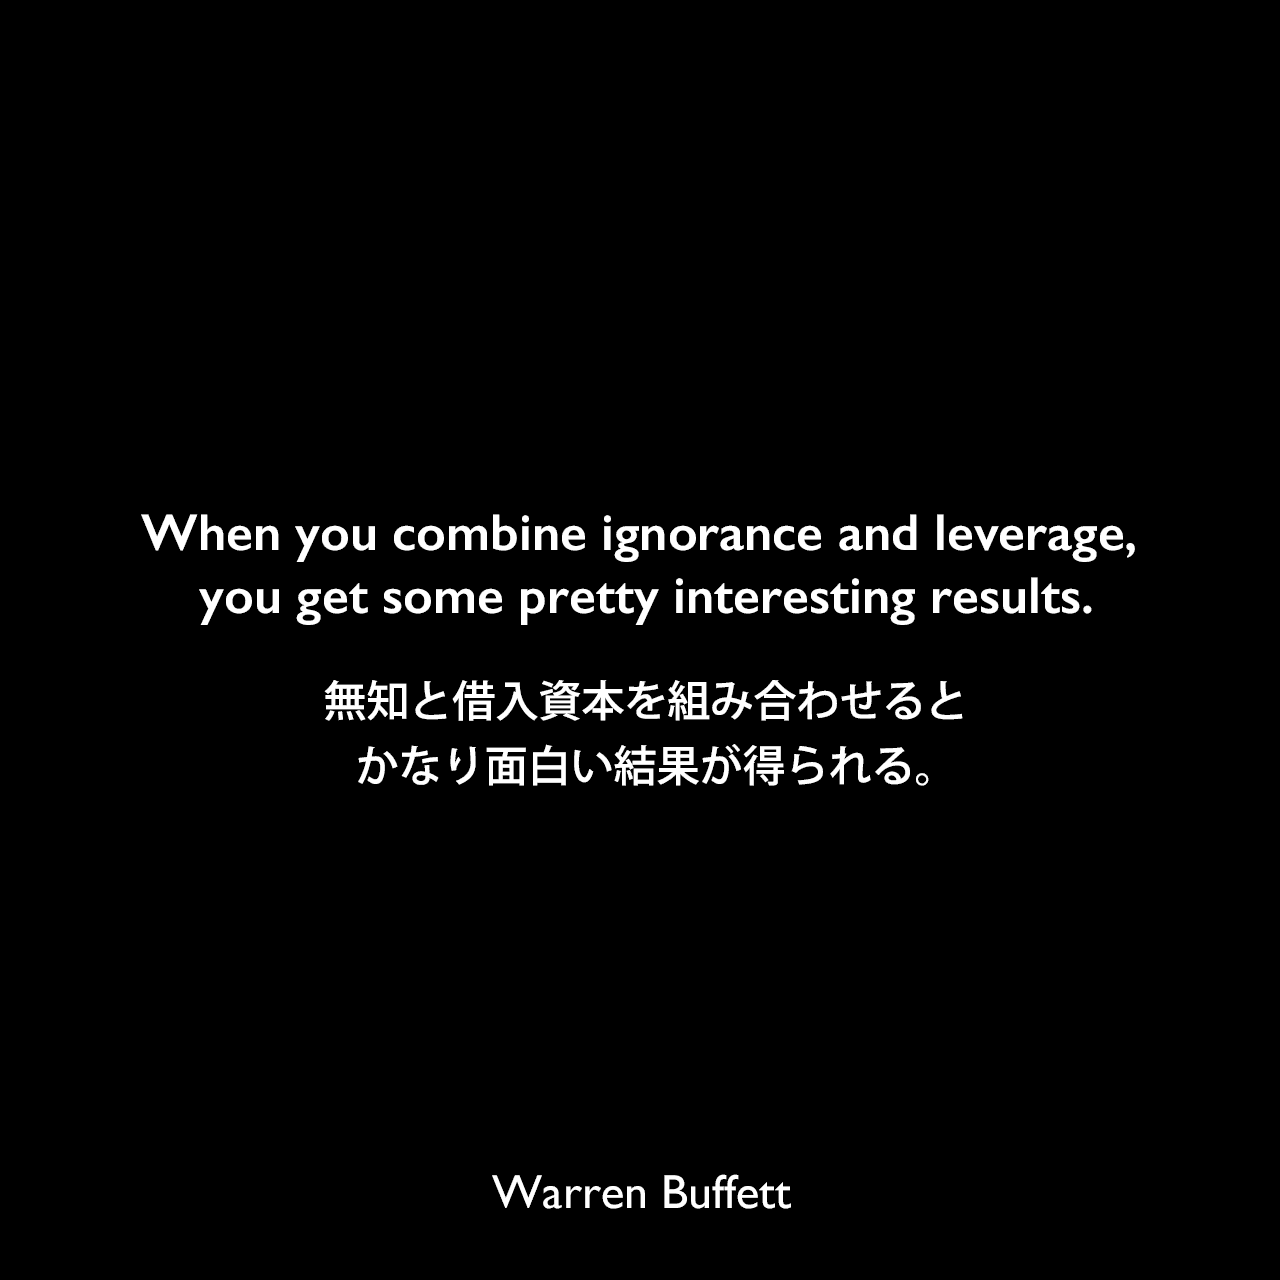 When you combine ignorance and leverage, you get some pretty interesting results.無知と借入資本を組み合わせると、かなり面白い結果が得られる。Warren Buffett